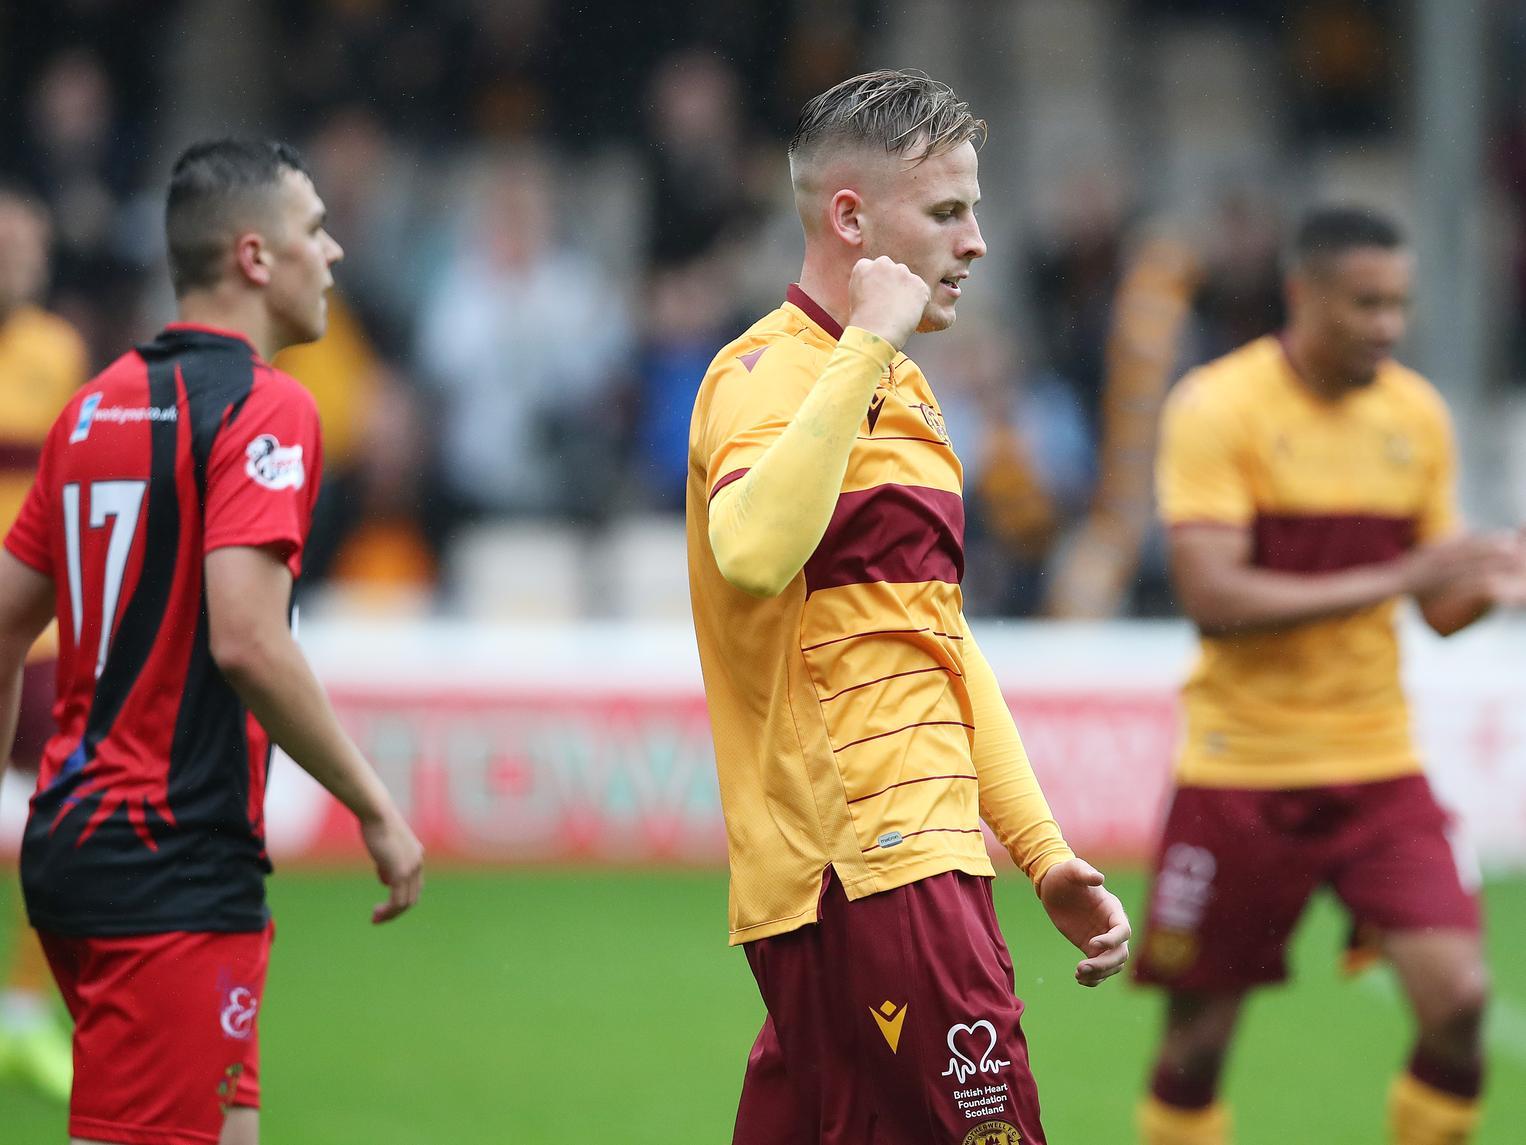 Bristol City are understood to be keeping tabs on Motherwell striker James Scott, who has scored six goals for his side this season. (Daily Record)